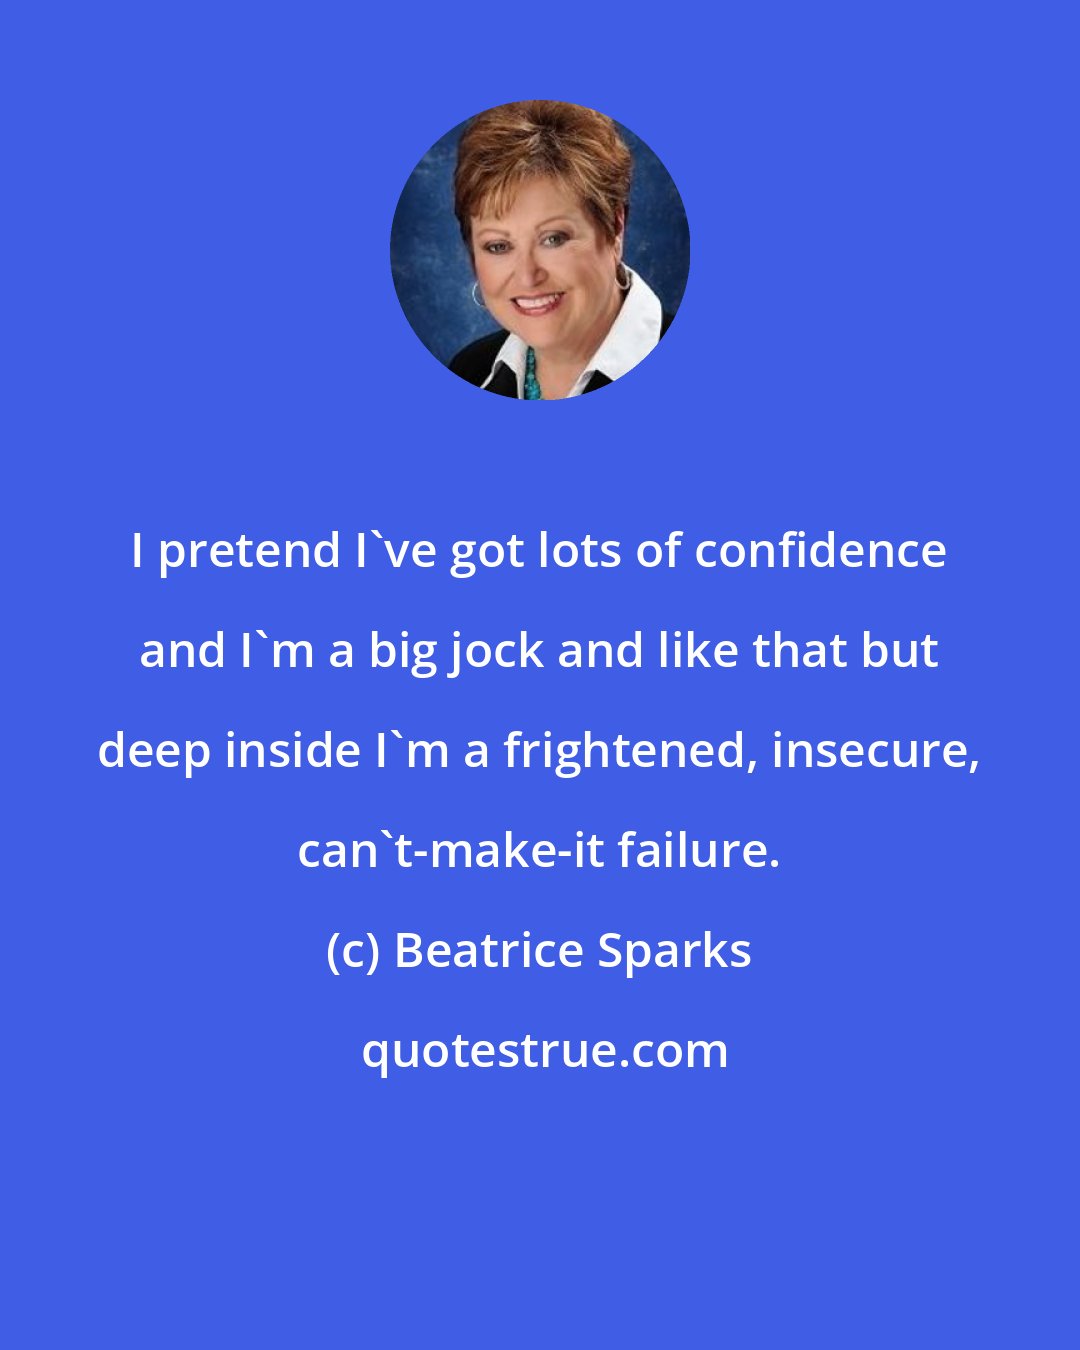 Beatrice Sparks: I pretend I've got lots of confidence and I'm a big jock and like that but deep inside I'm a frightened, insecure, can't-make-it failure.